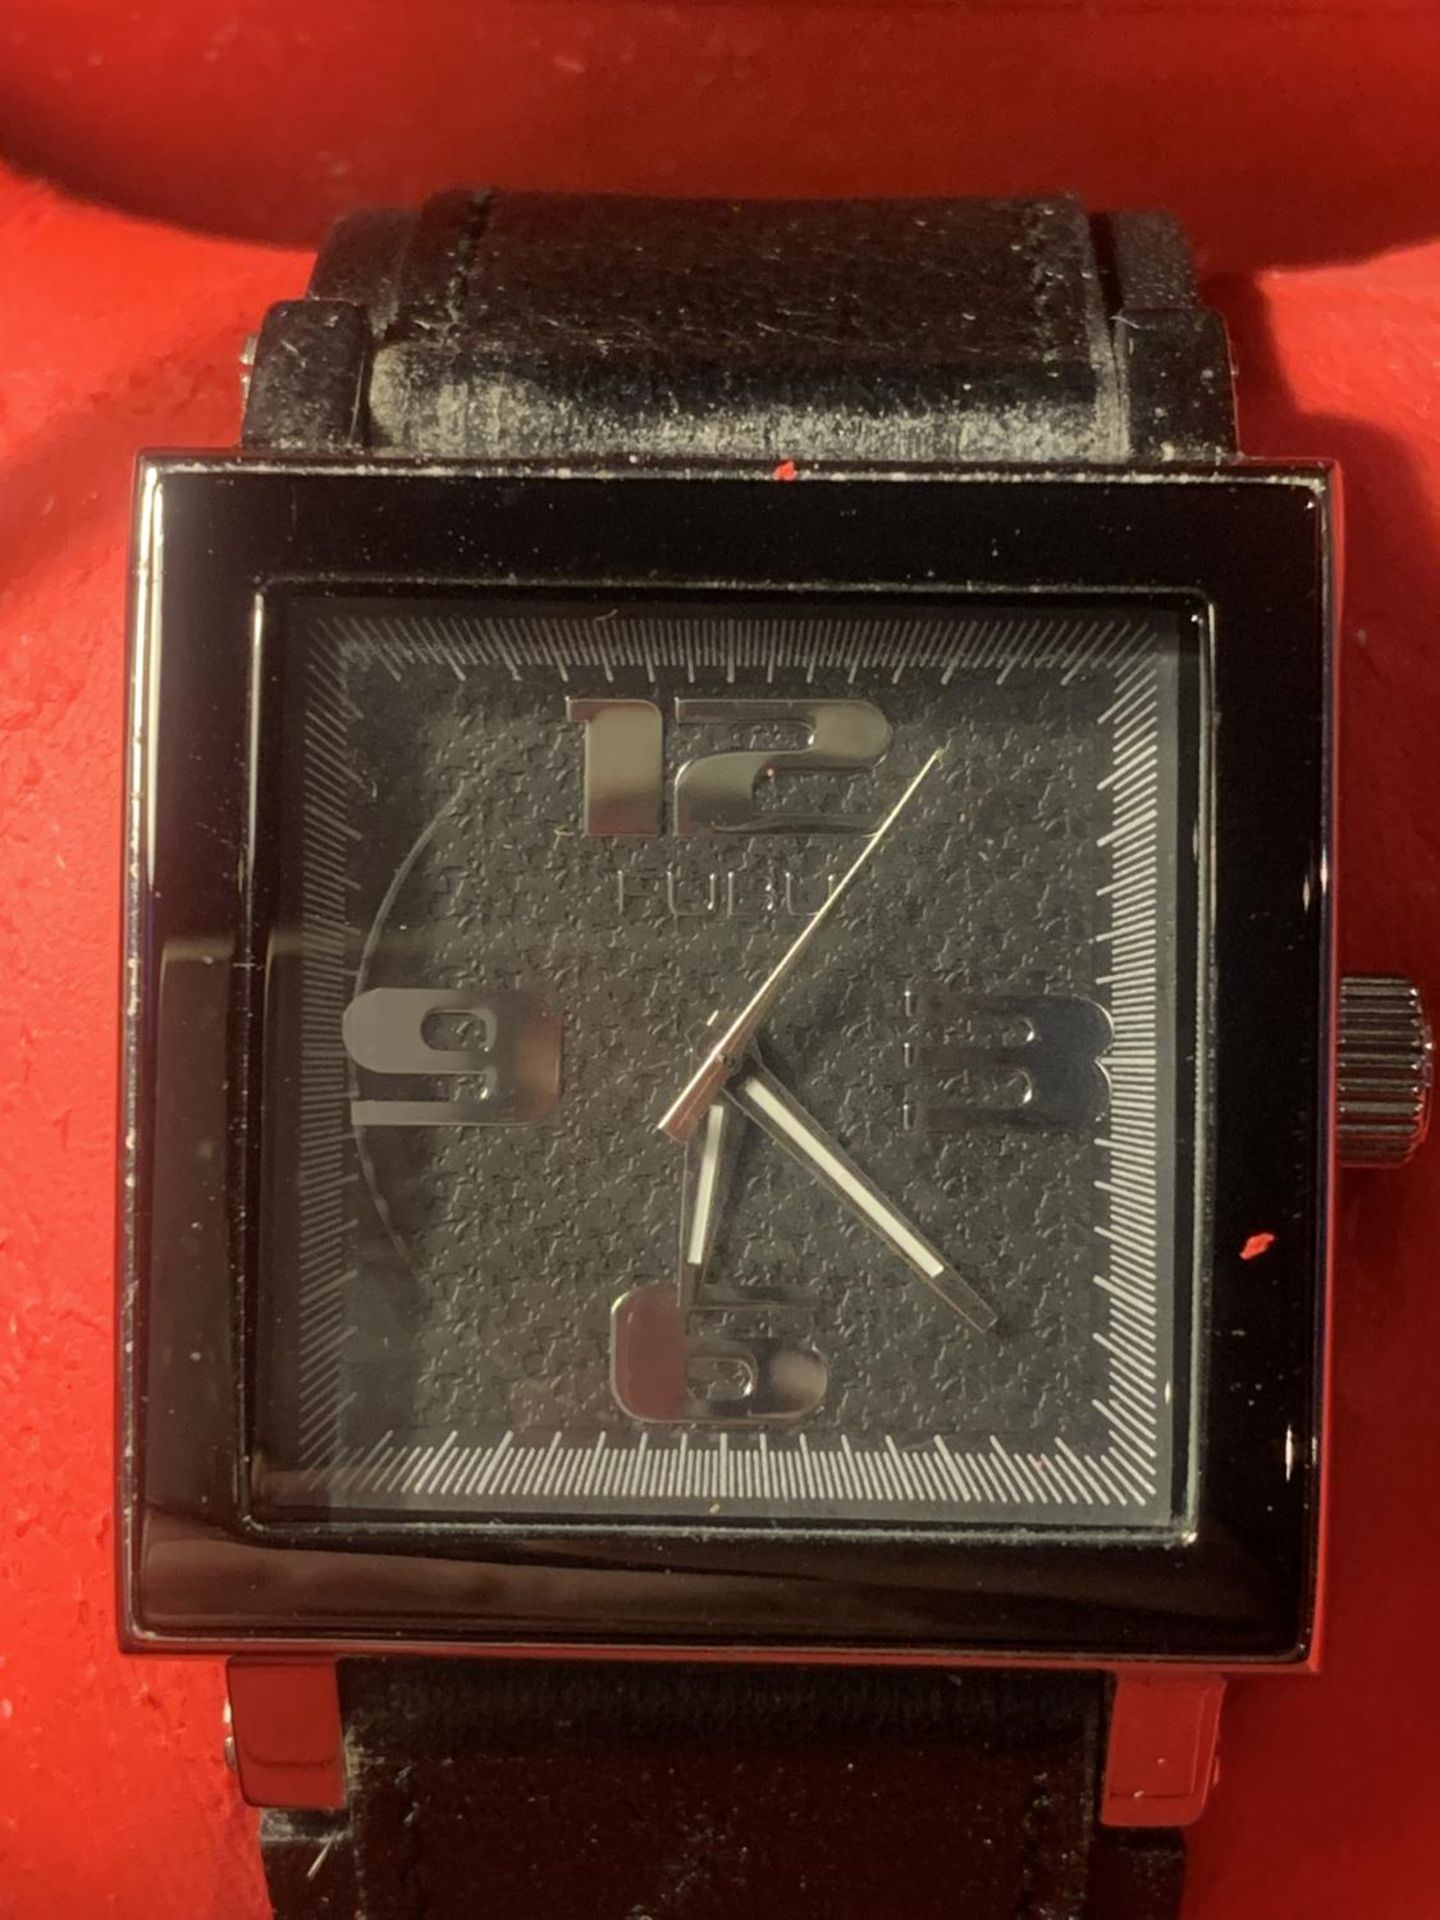 AN AS NEW AND BOXED FUBU WRISTWATCH SEEN WORKING BUT NO WARRANTY - Image 2 of 4